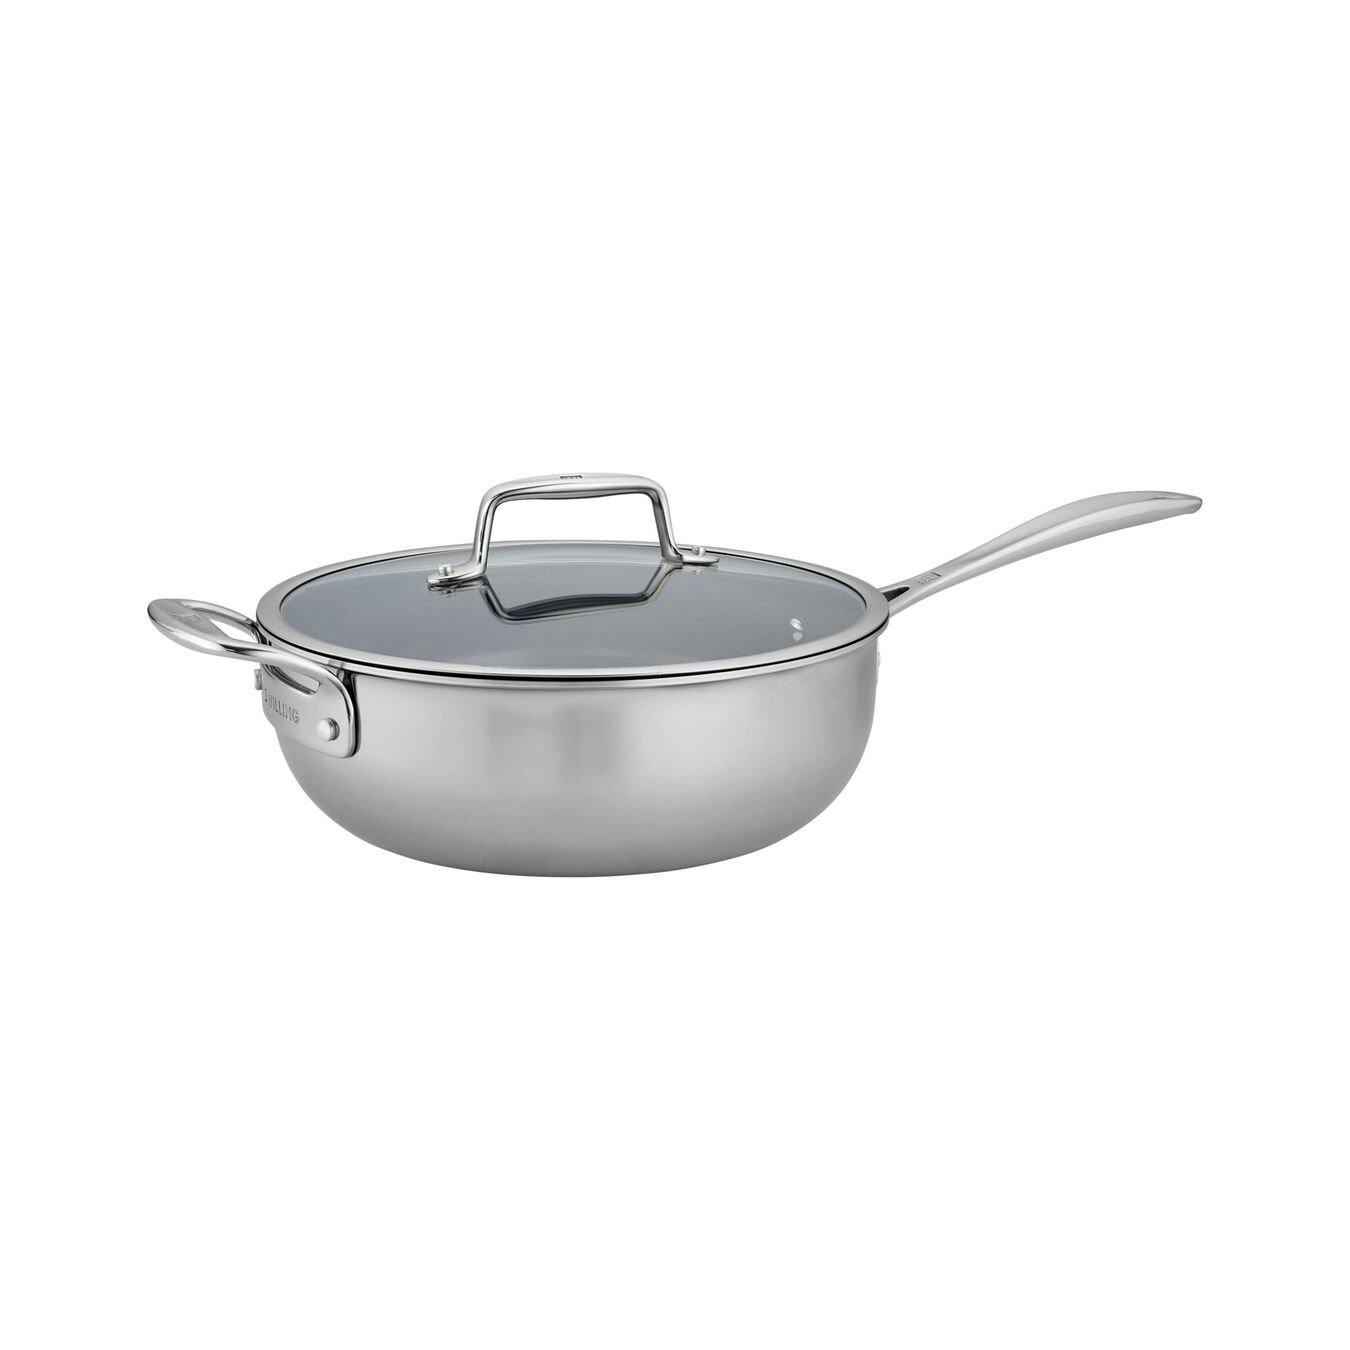 Zwilling Clad CFX 4.5-QT Stainless Steel Ceramic Nonstick Perfect Pan